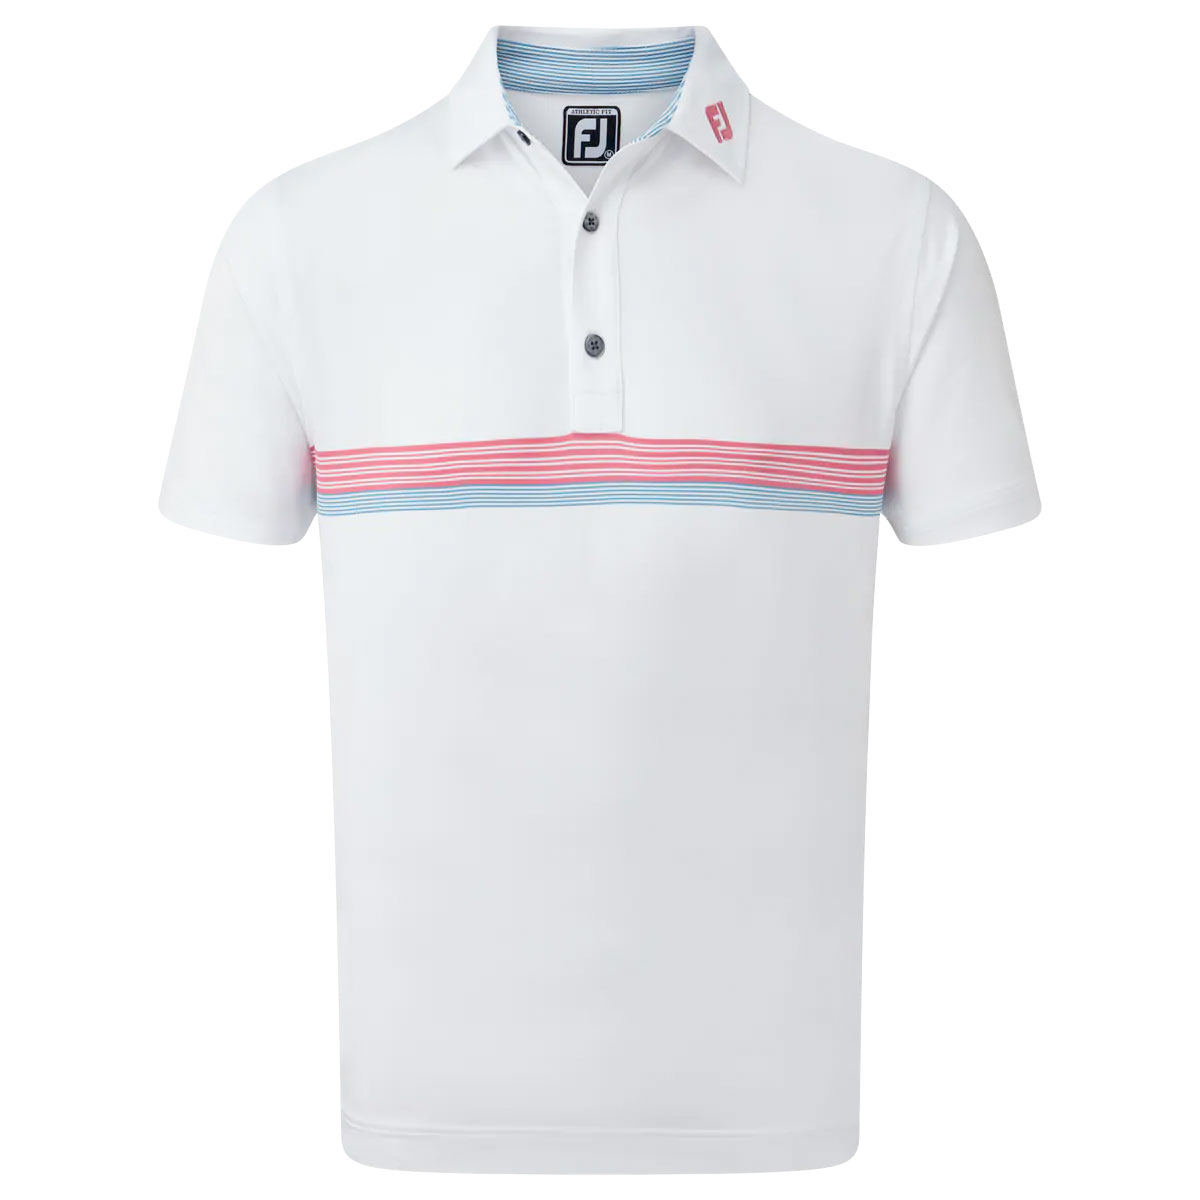 FootJoy Lisle Engineered Chestband Mens Golf Polo Shirt  - White/Cape Red/Storm Blue